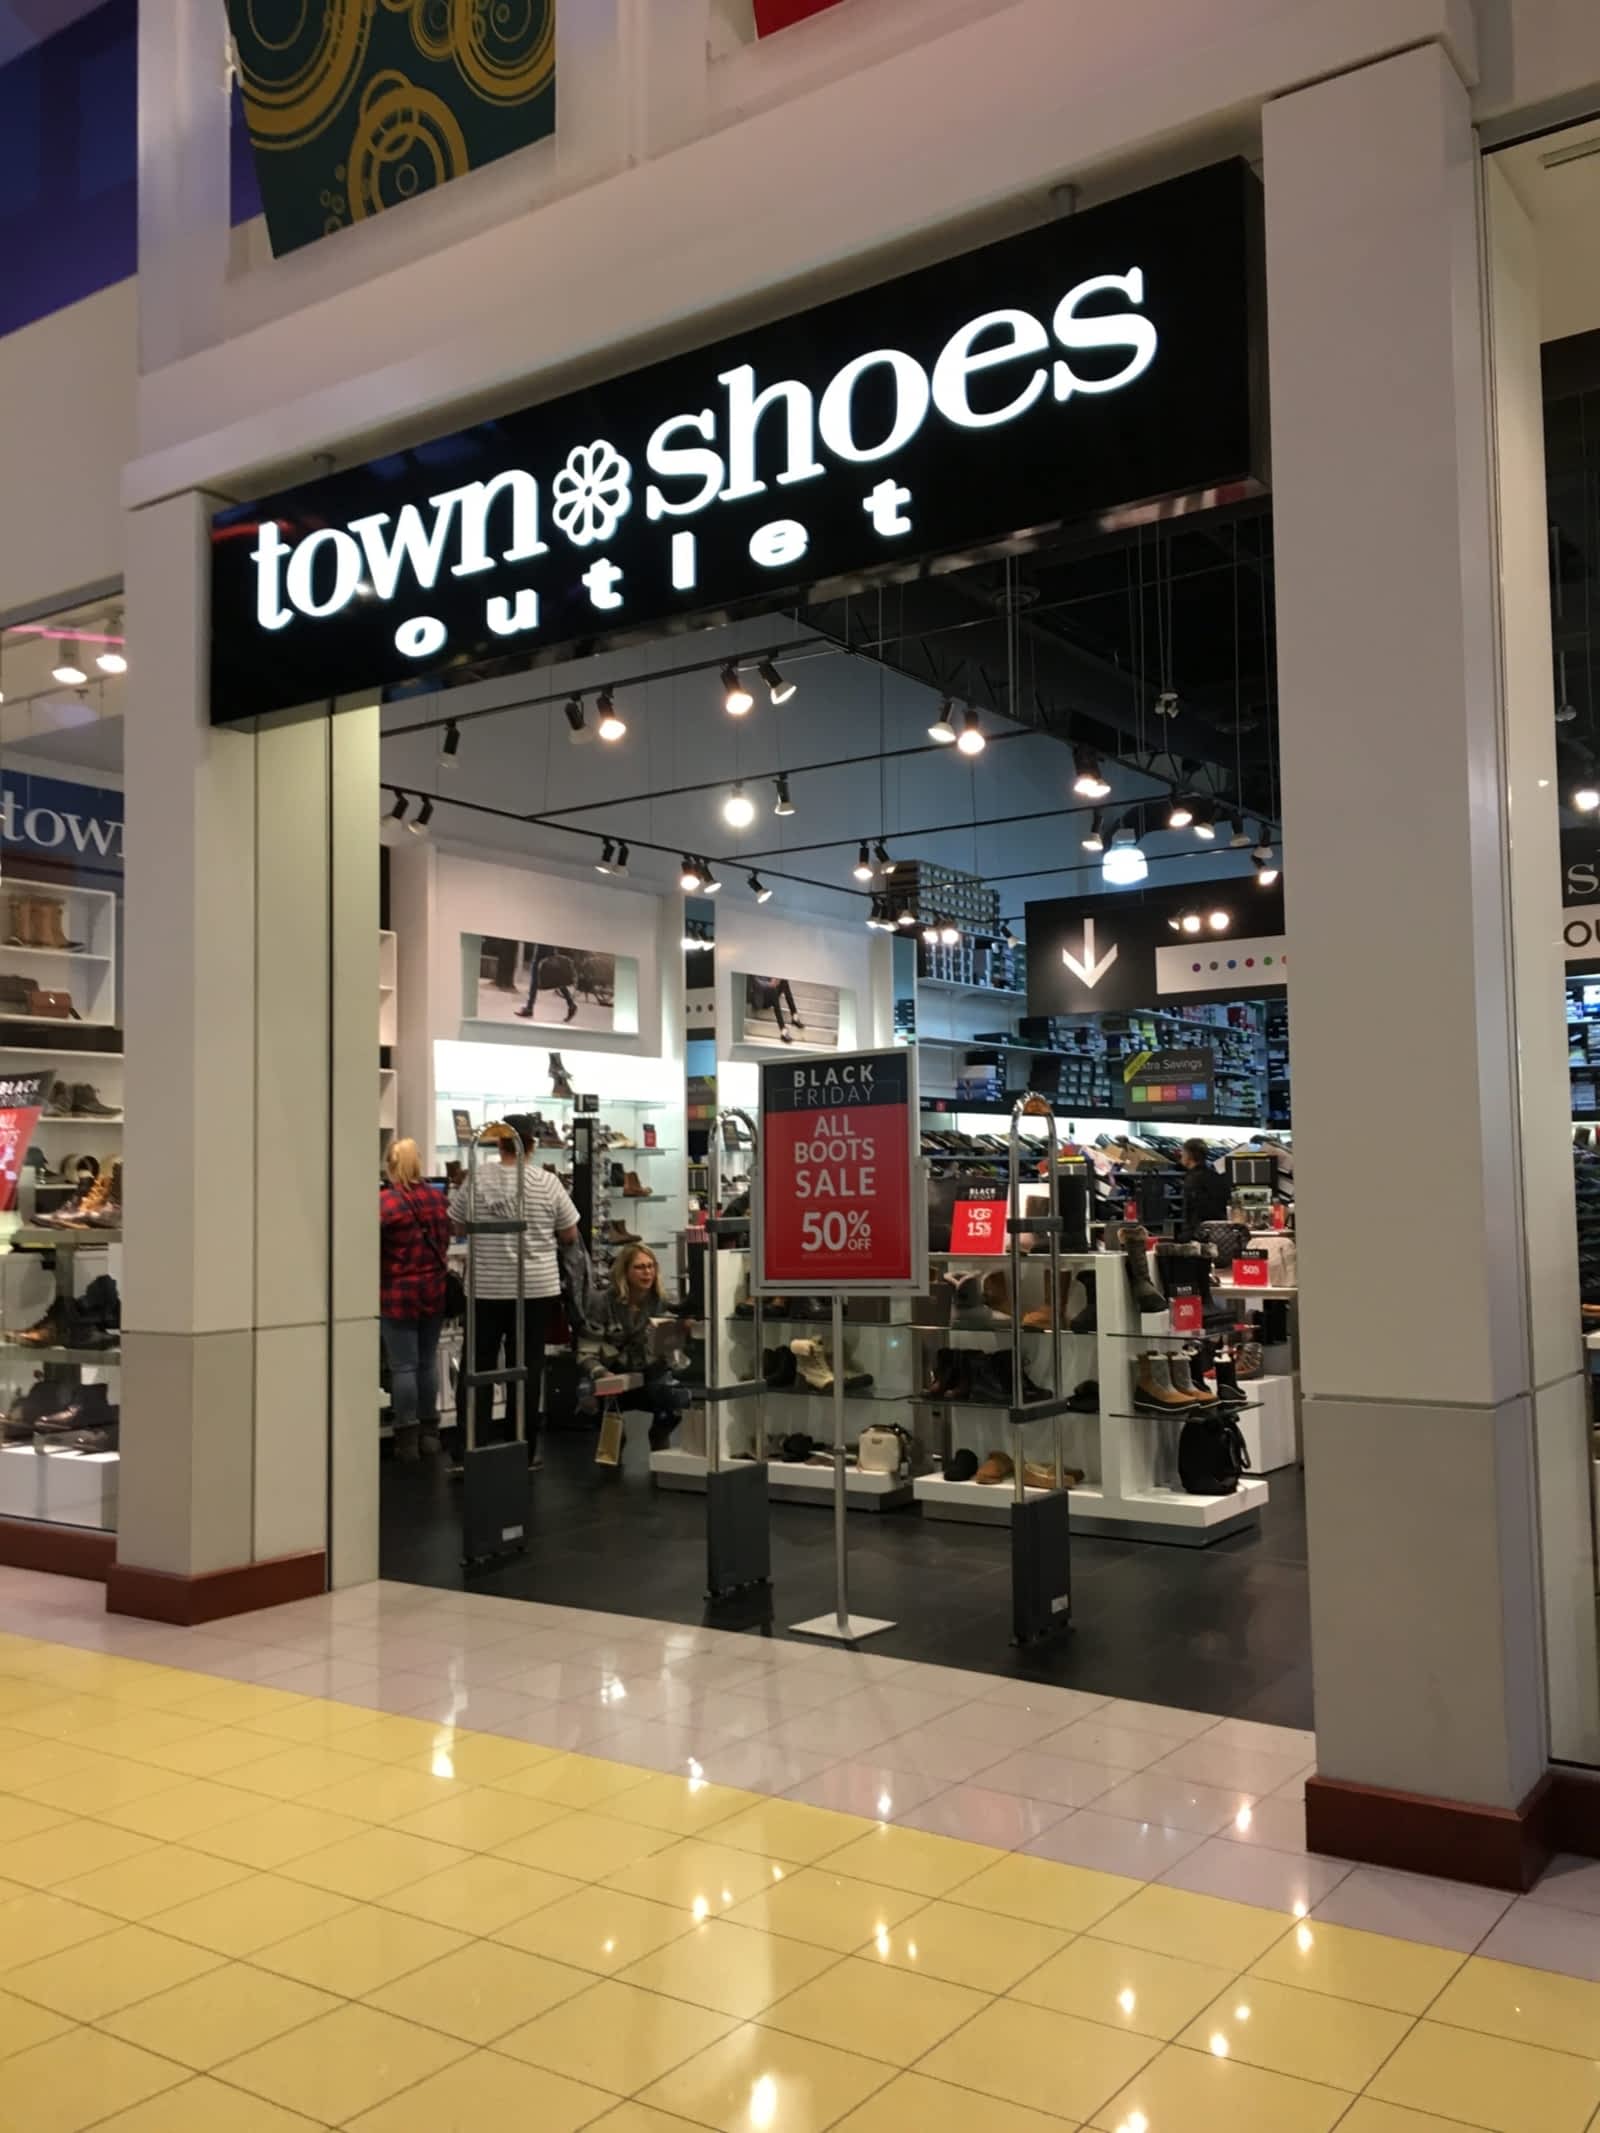 town shoes